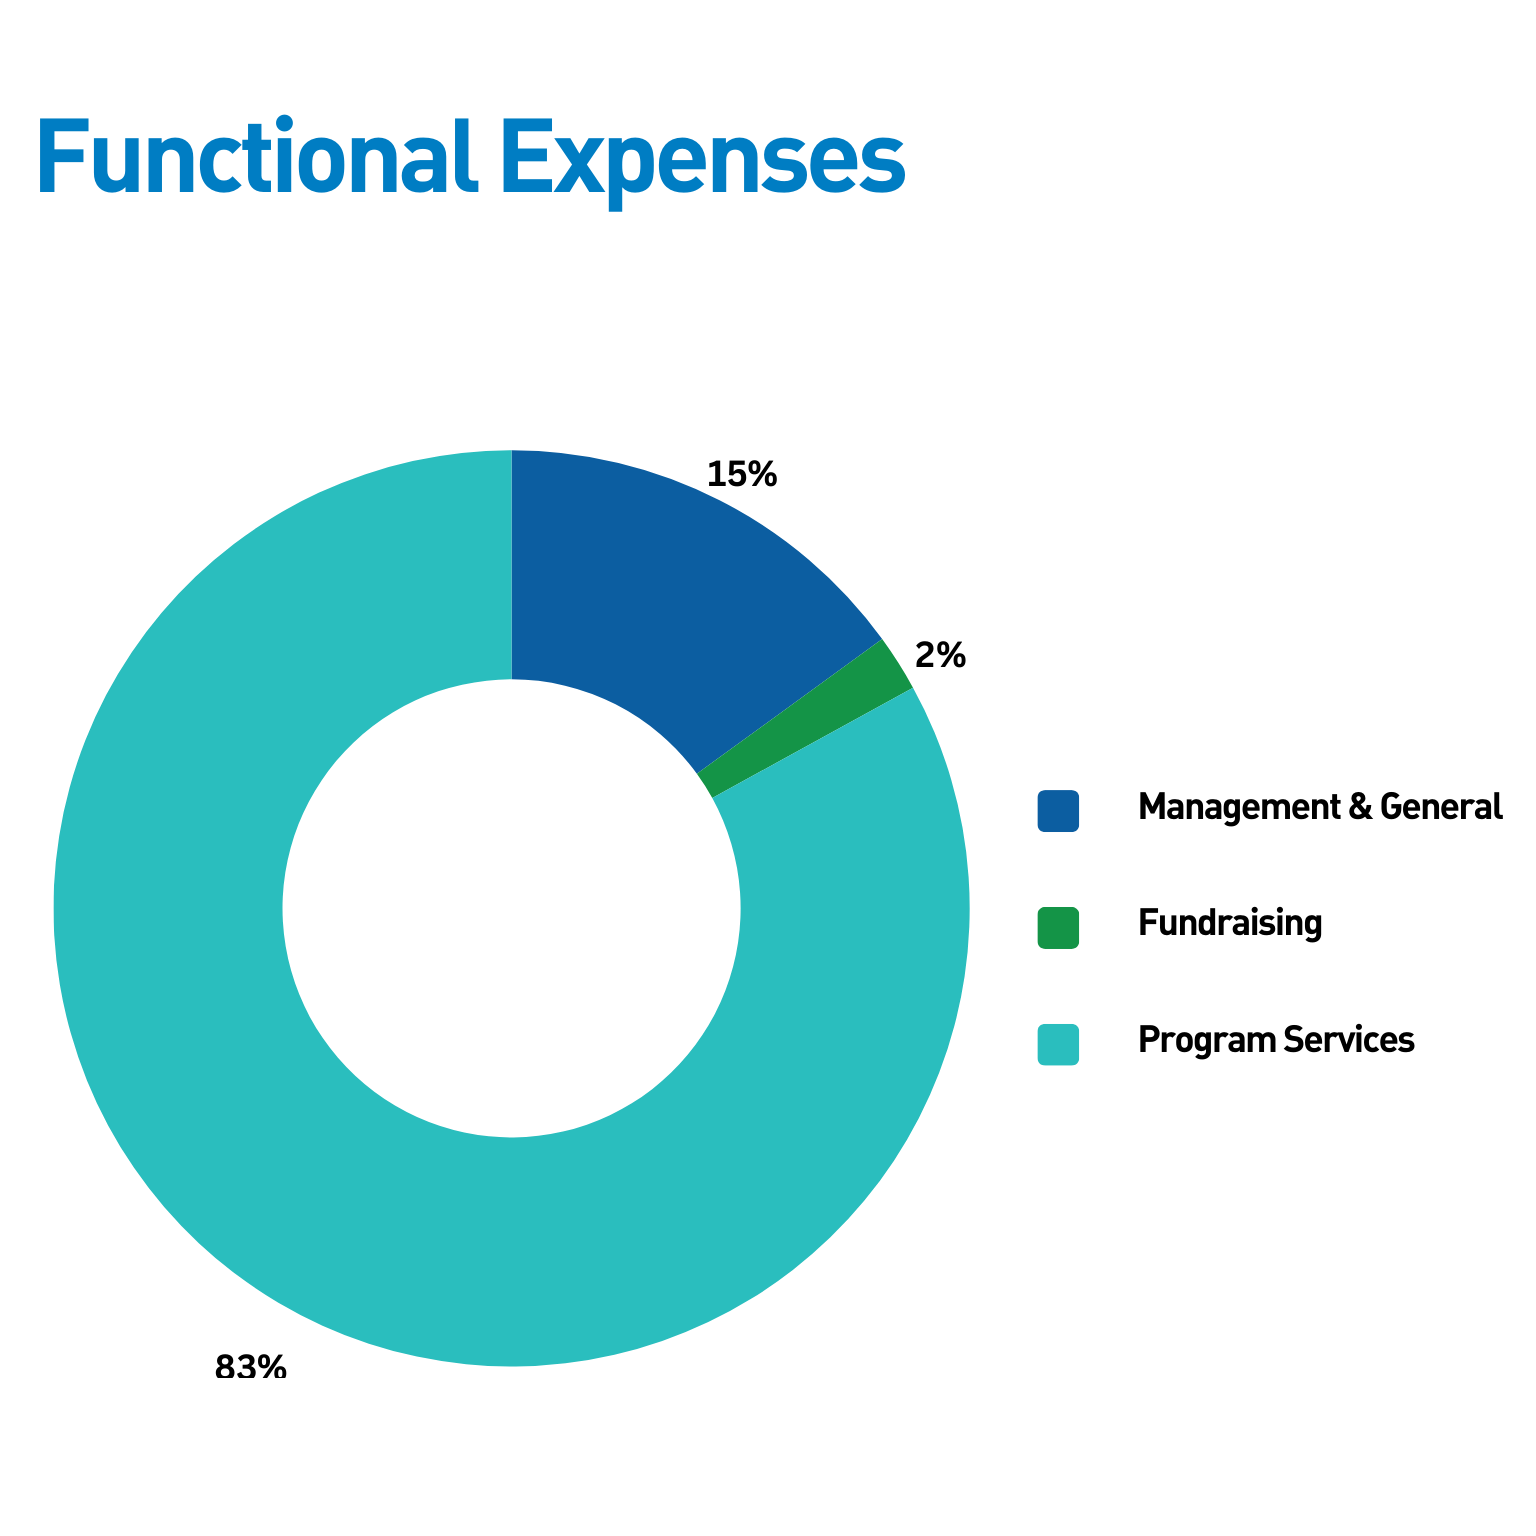 2022 Functional Expenses Financials (3)